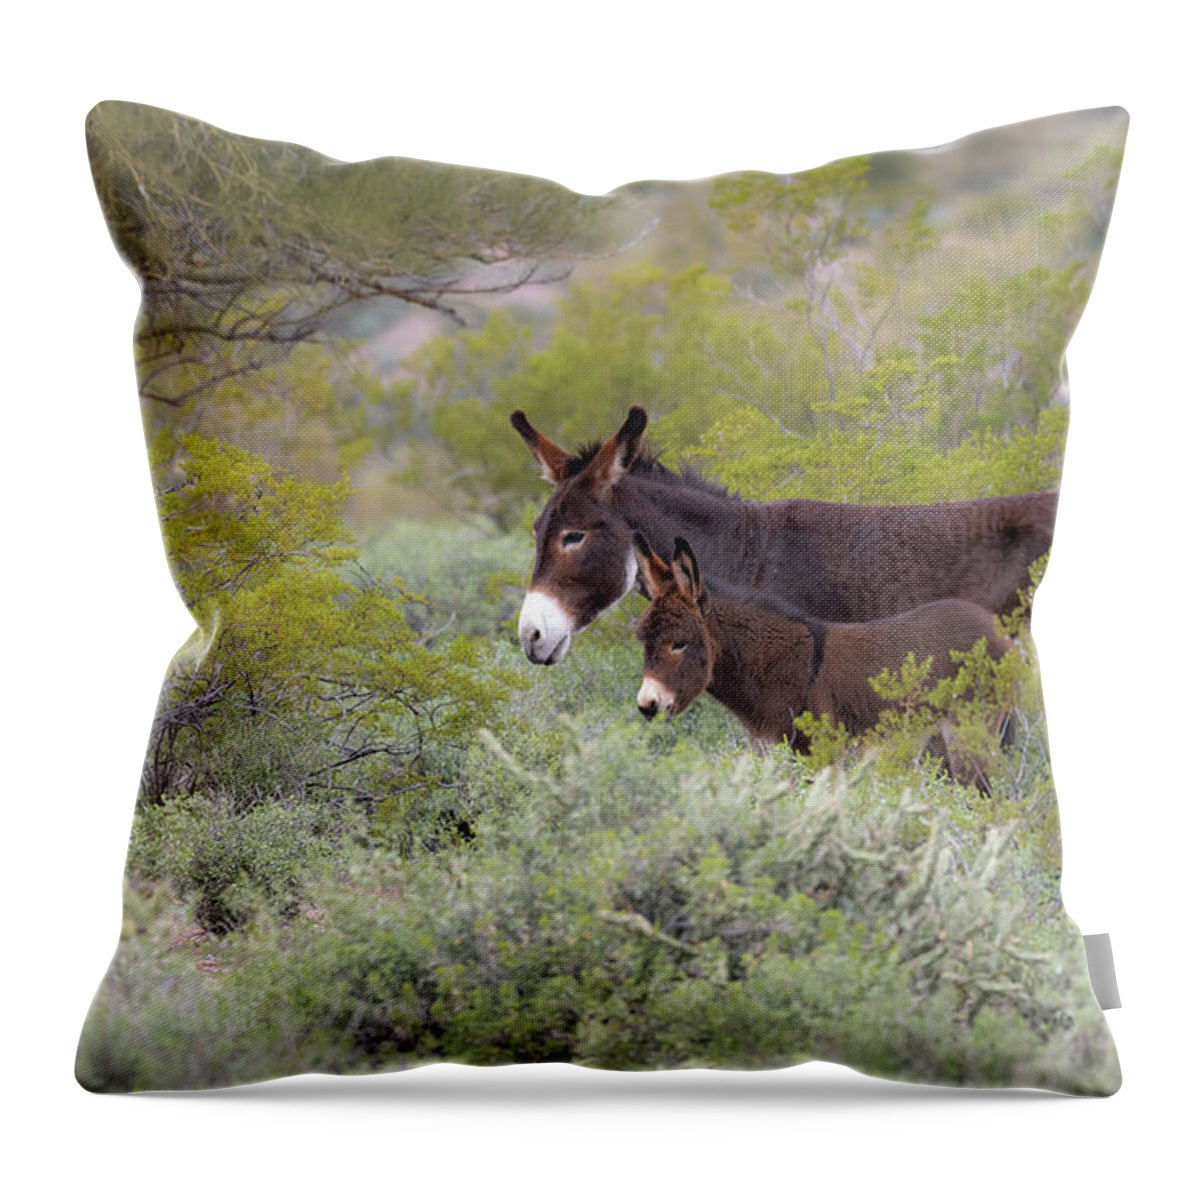 Wild Burro Throw Pillow featuring the photograph Surrounded by Mary Hone